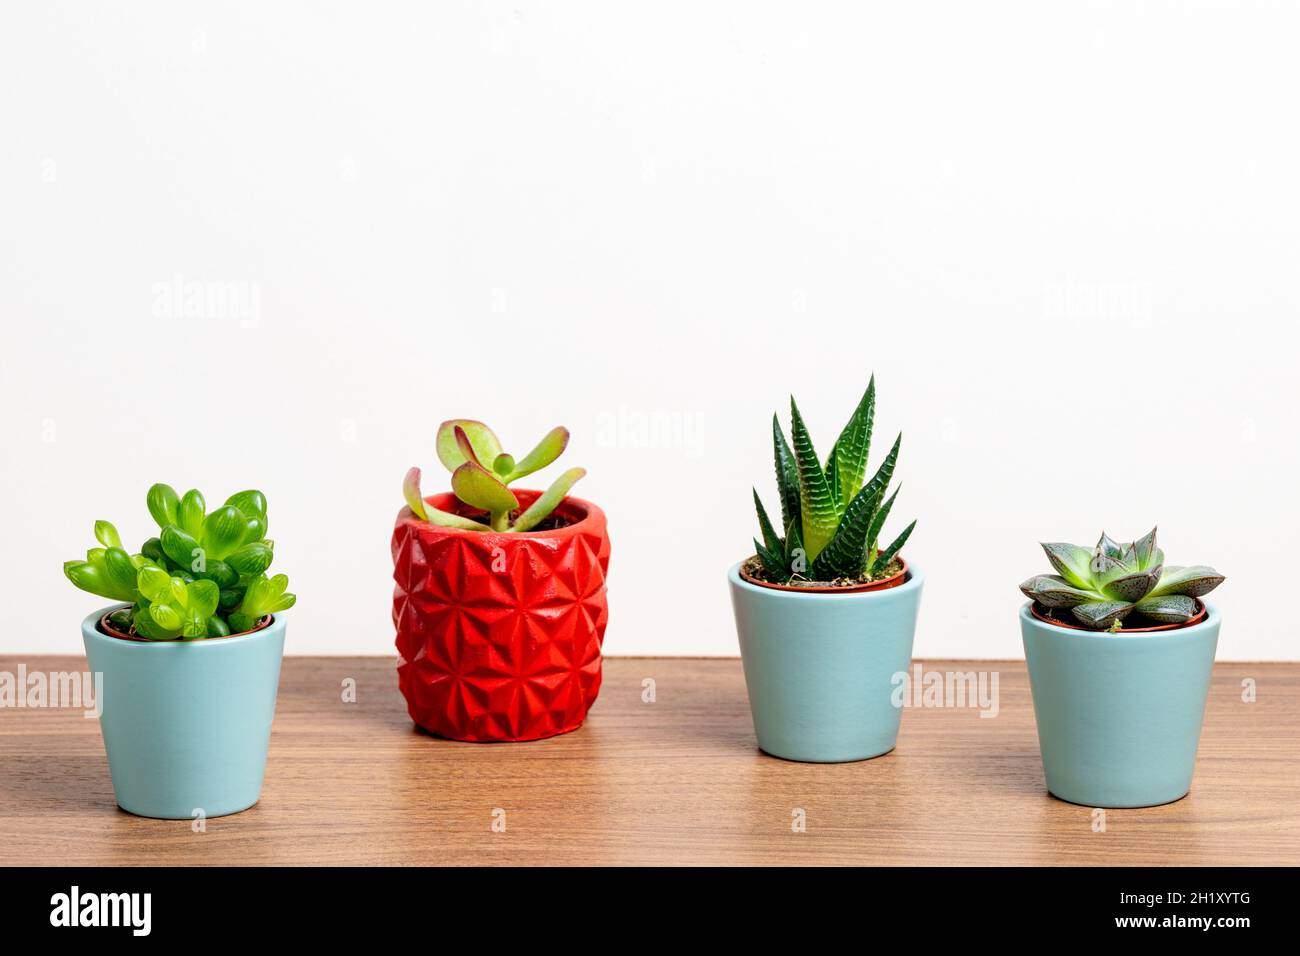 Close up photo of colourful succulents standing on wooden table.House decoration concept. Stock Photo